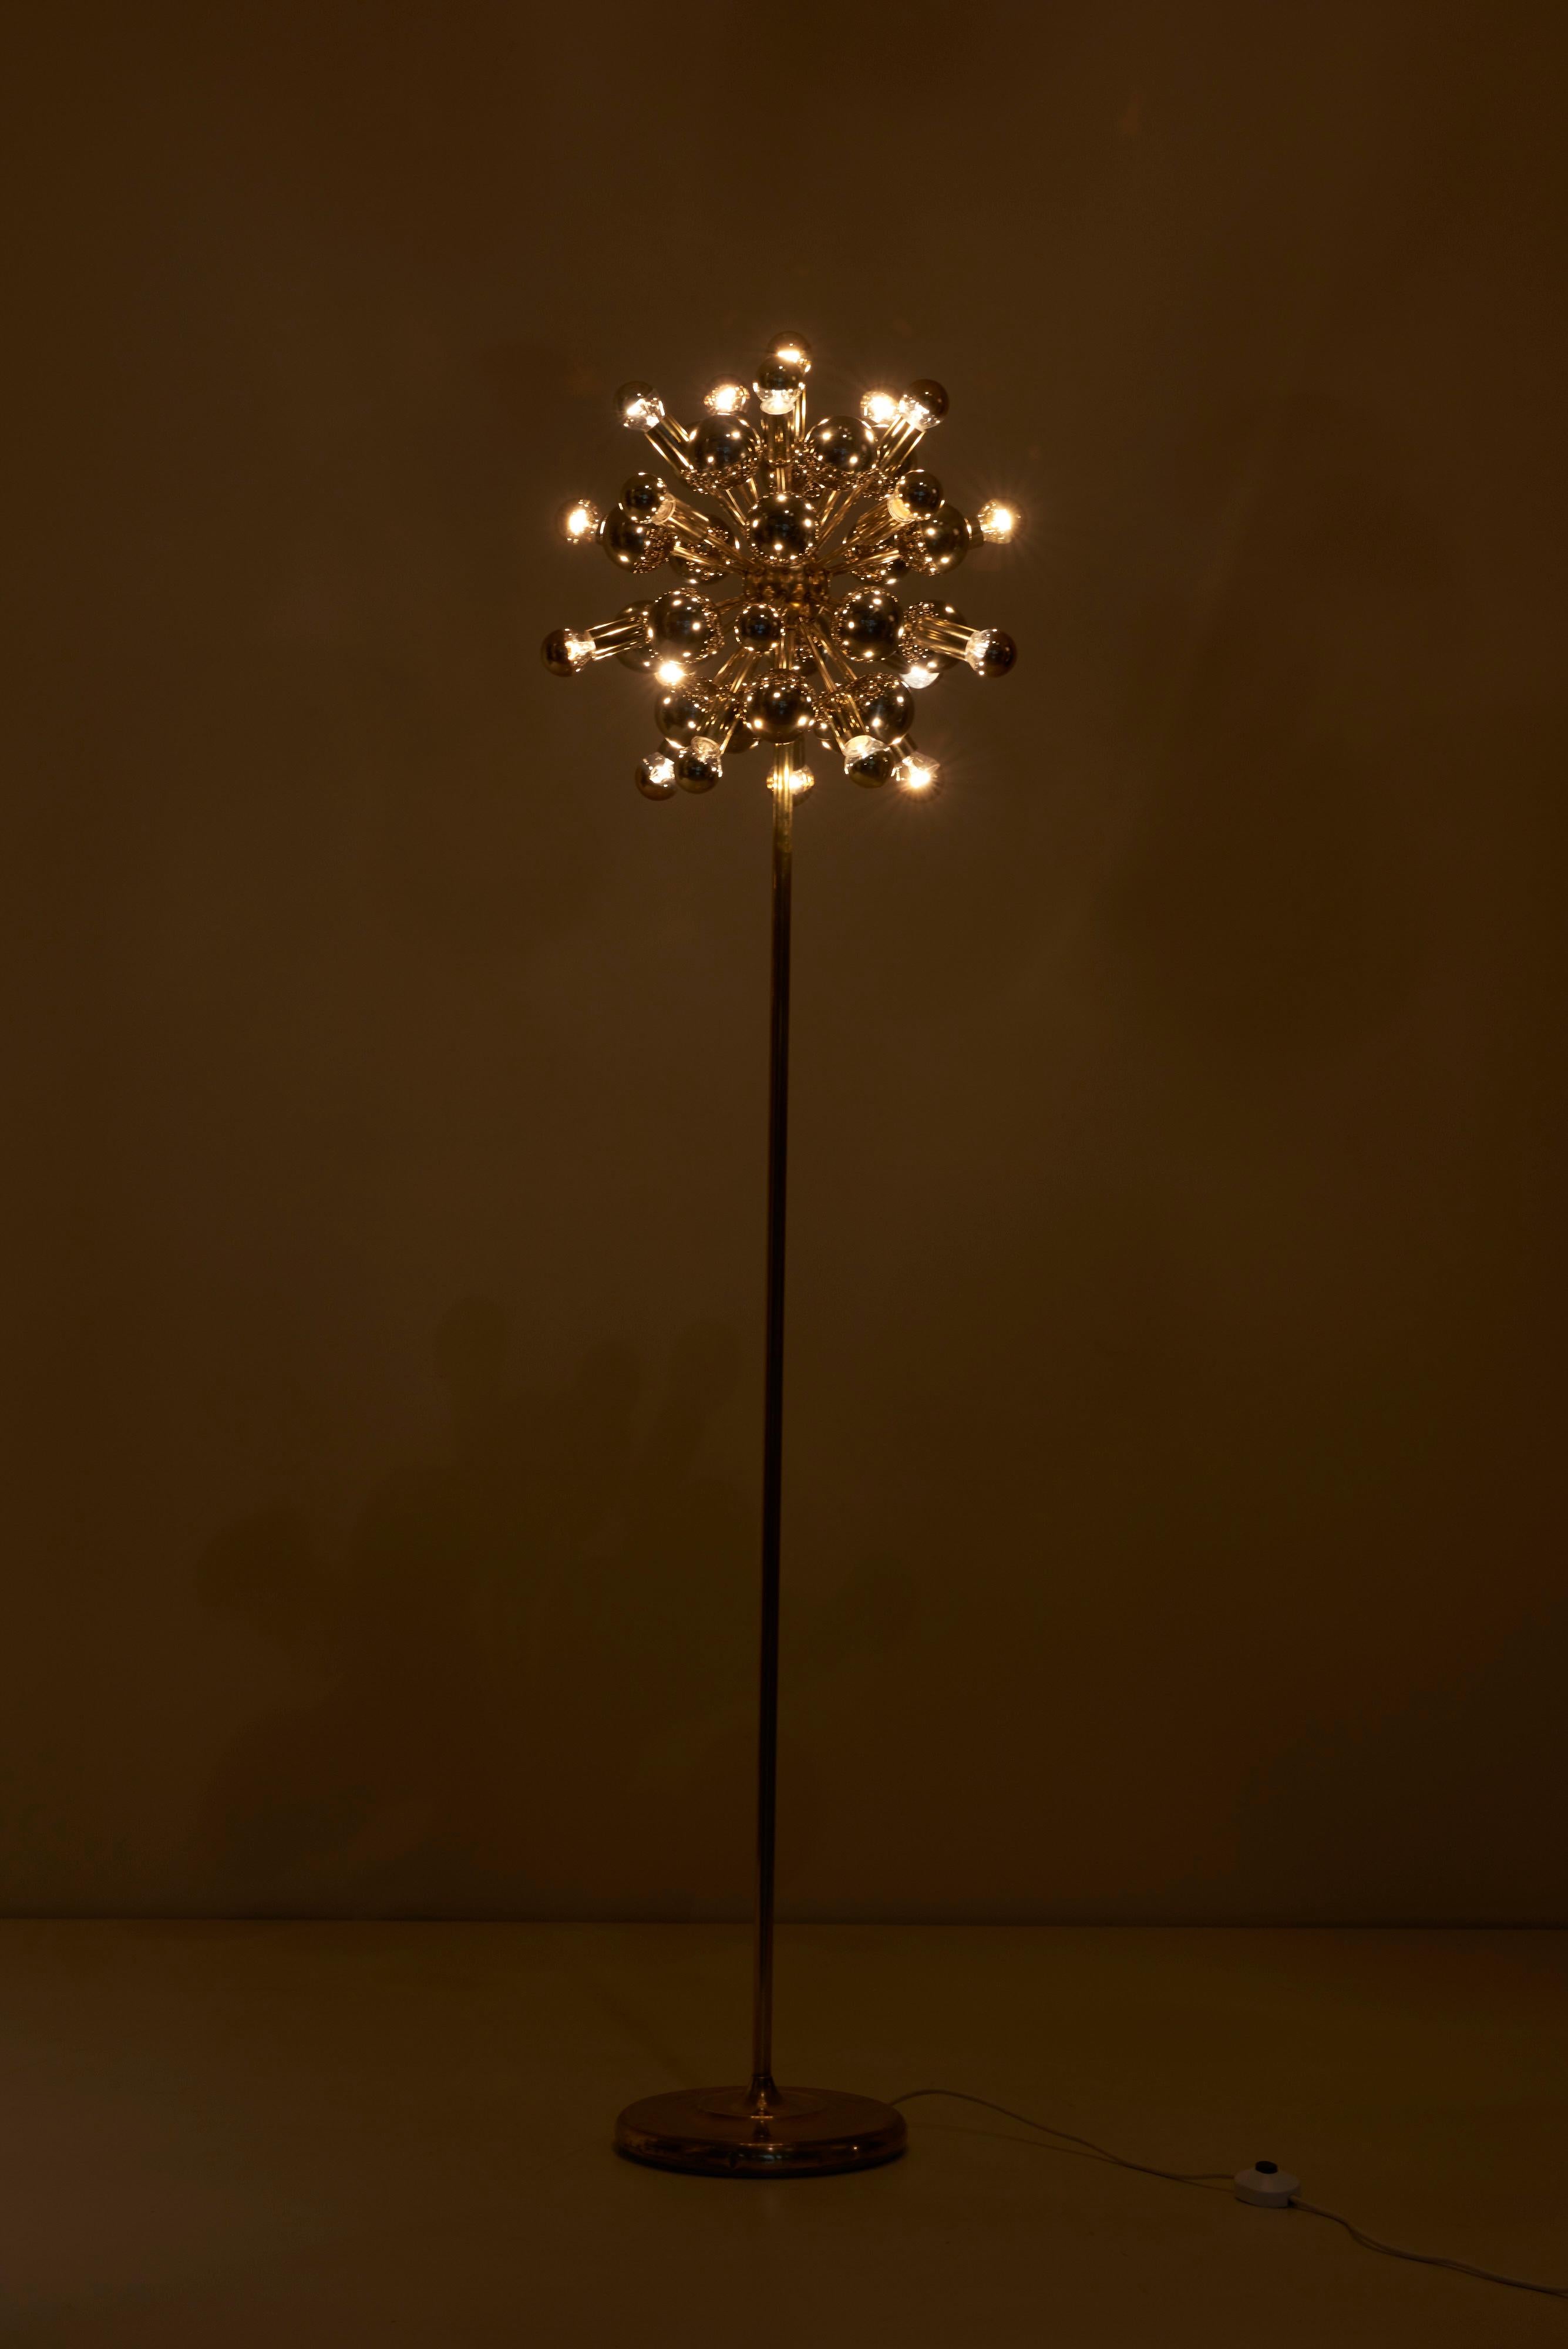 Sputnik floor lamp in brass by Cosack Leuchten, Germany.
To be on the the safe side, the lamp should be checked locally by a specialist concerning local requirements.